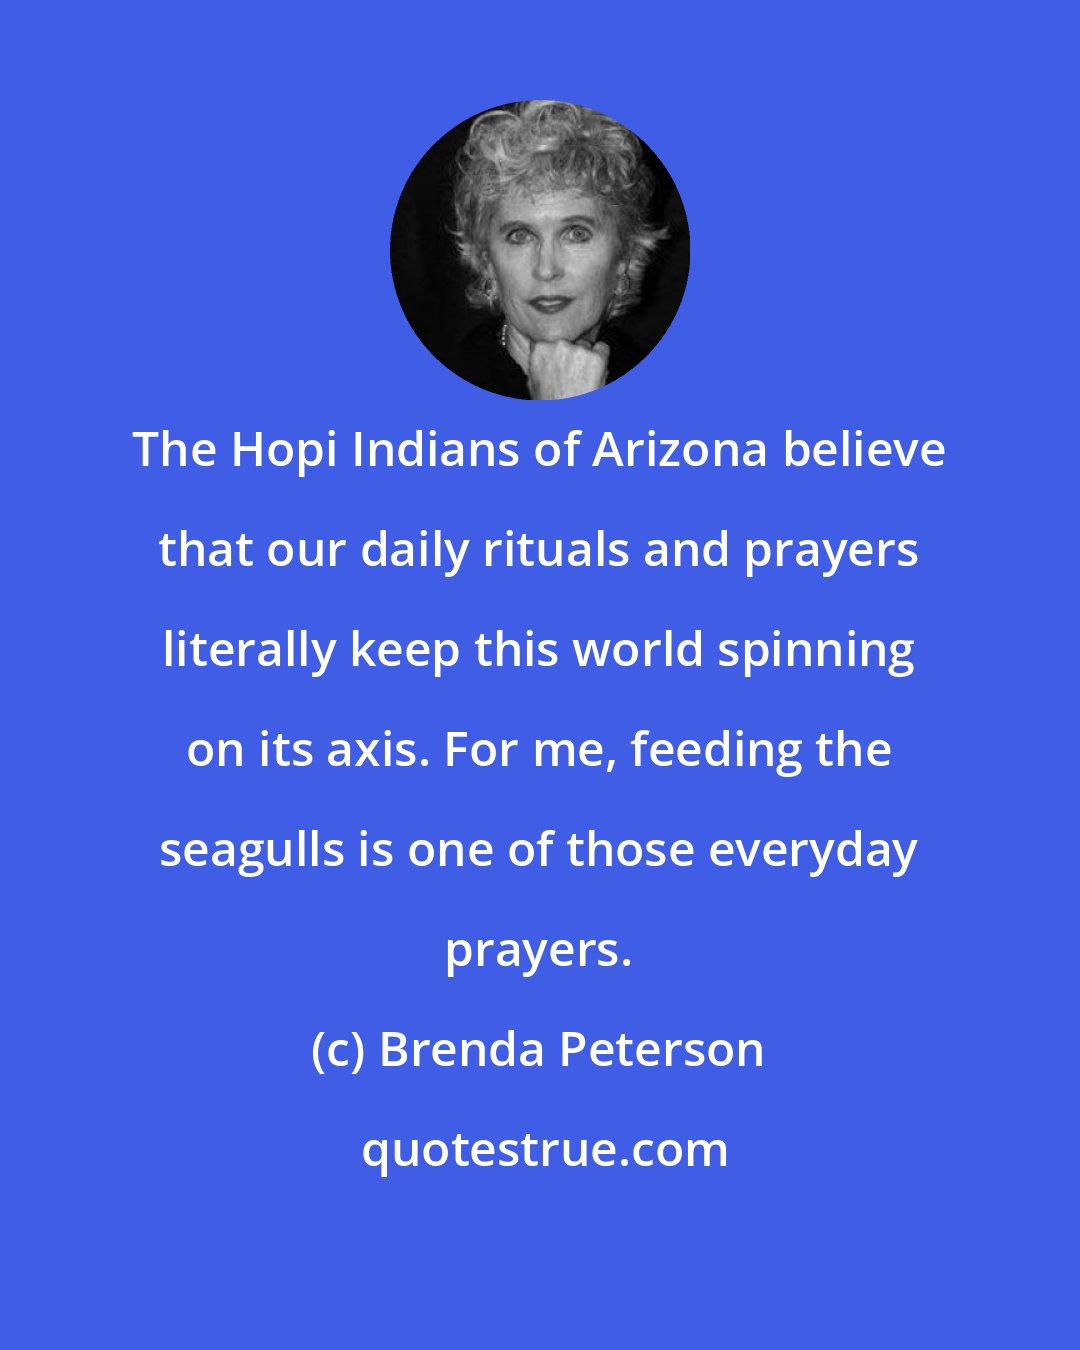 Brenda Peterson: The Hopi Indians of Arizona believe that our daily rituals and prayers literally keep this world spinning on its axis. For me, feeding the seagulls is one of those everyday prayers.